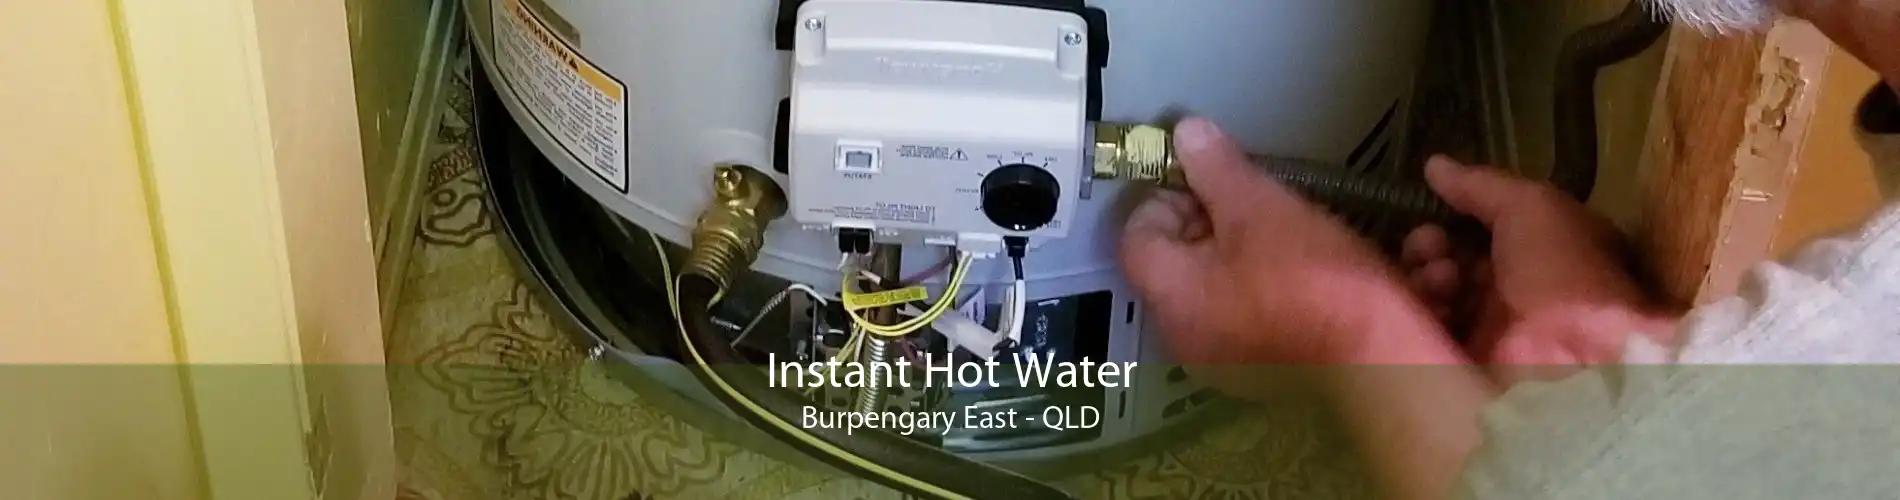 Instant Hot Water Burpengary East - QLD